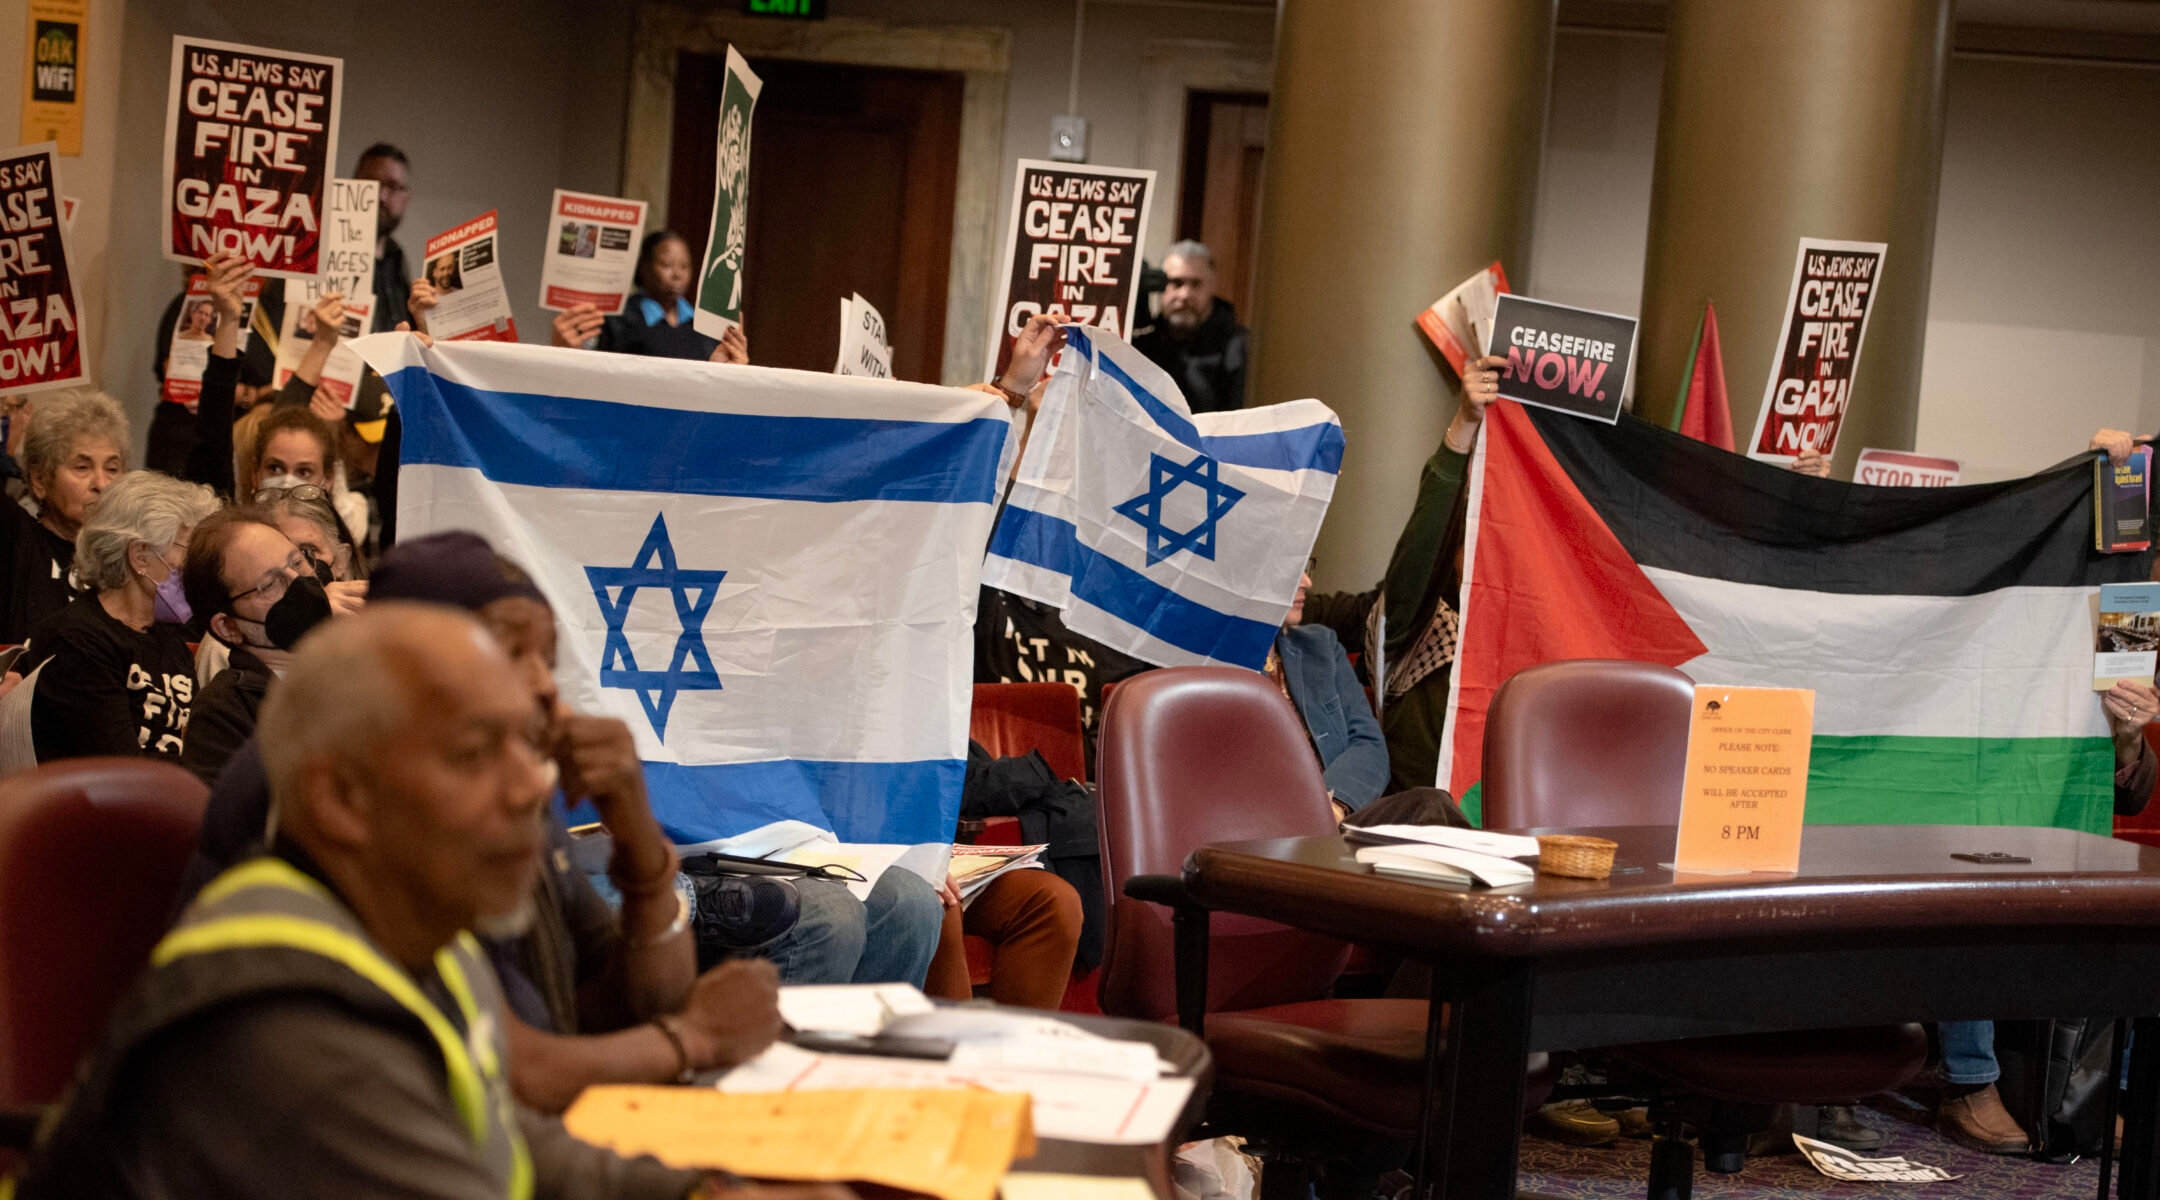 Oakland City Council rejects bid to denounce Hamas as public speakers ...